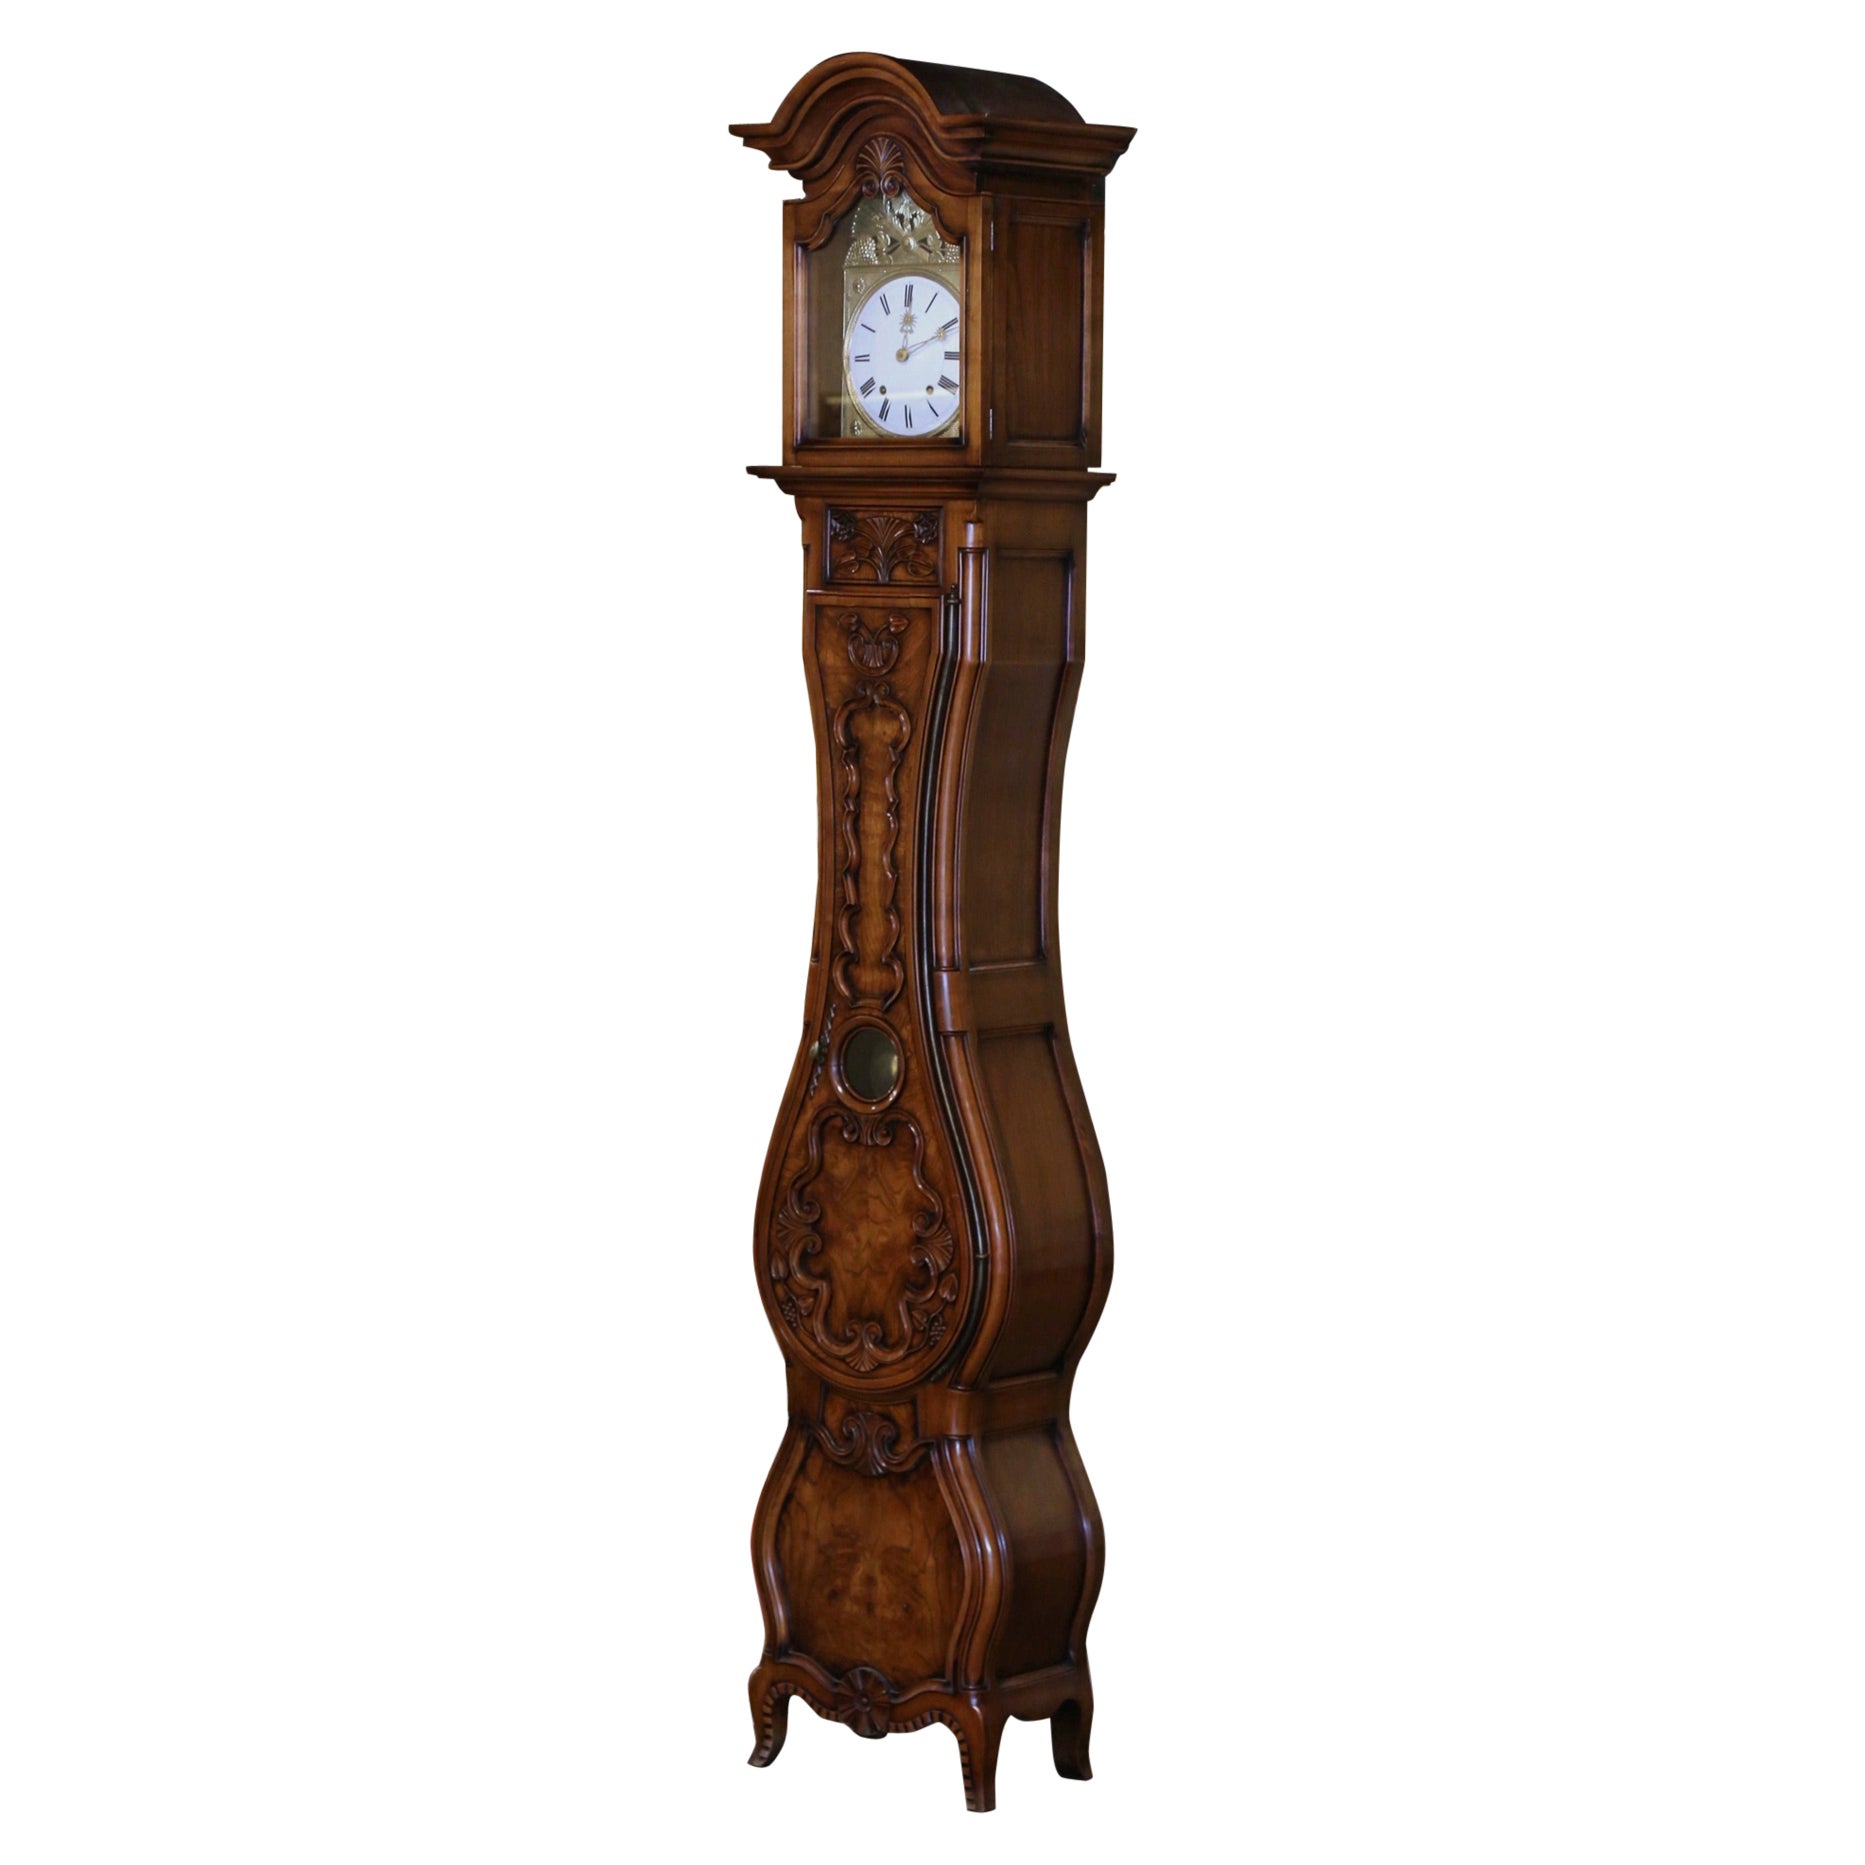 20th Century French Louis XV Carved Burl Wood Grandfather Clock from Lyon Region For Sale